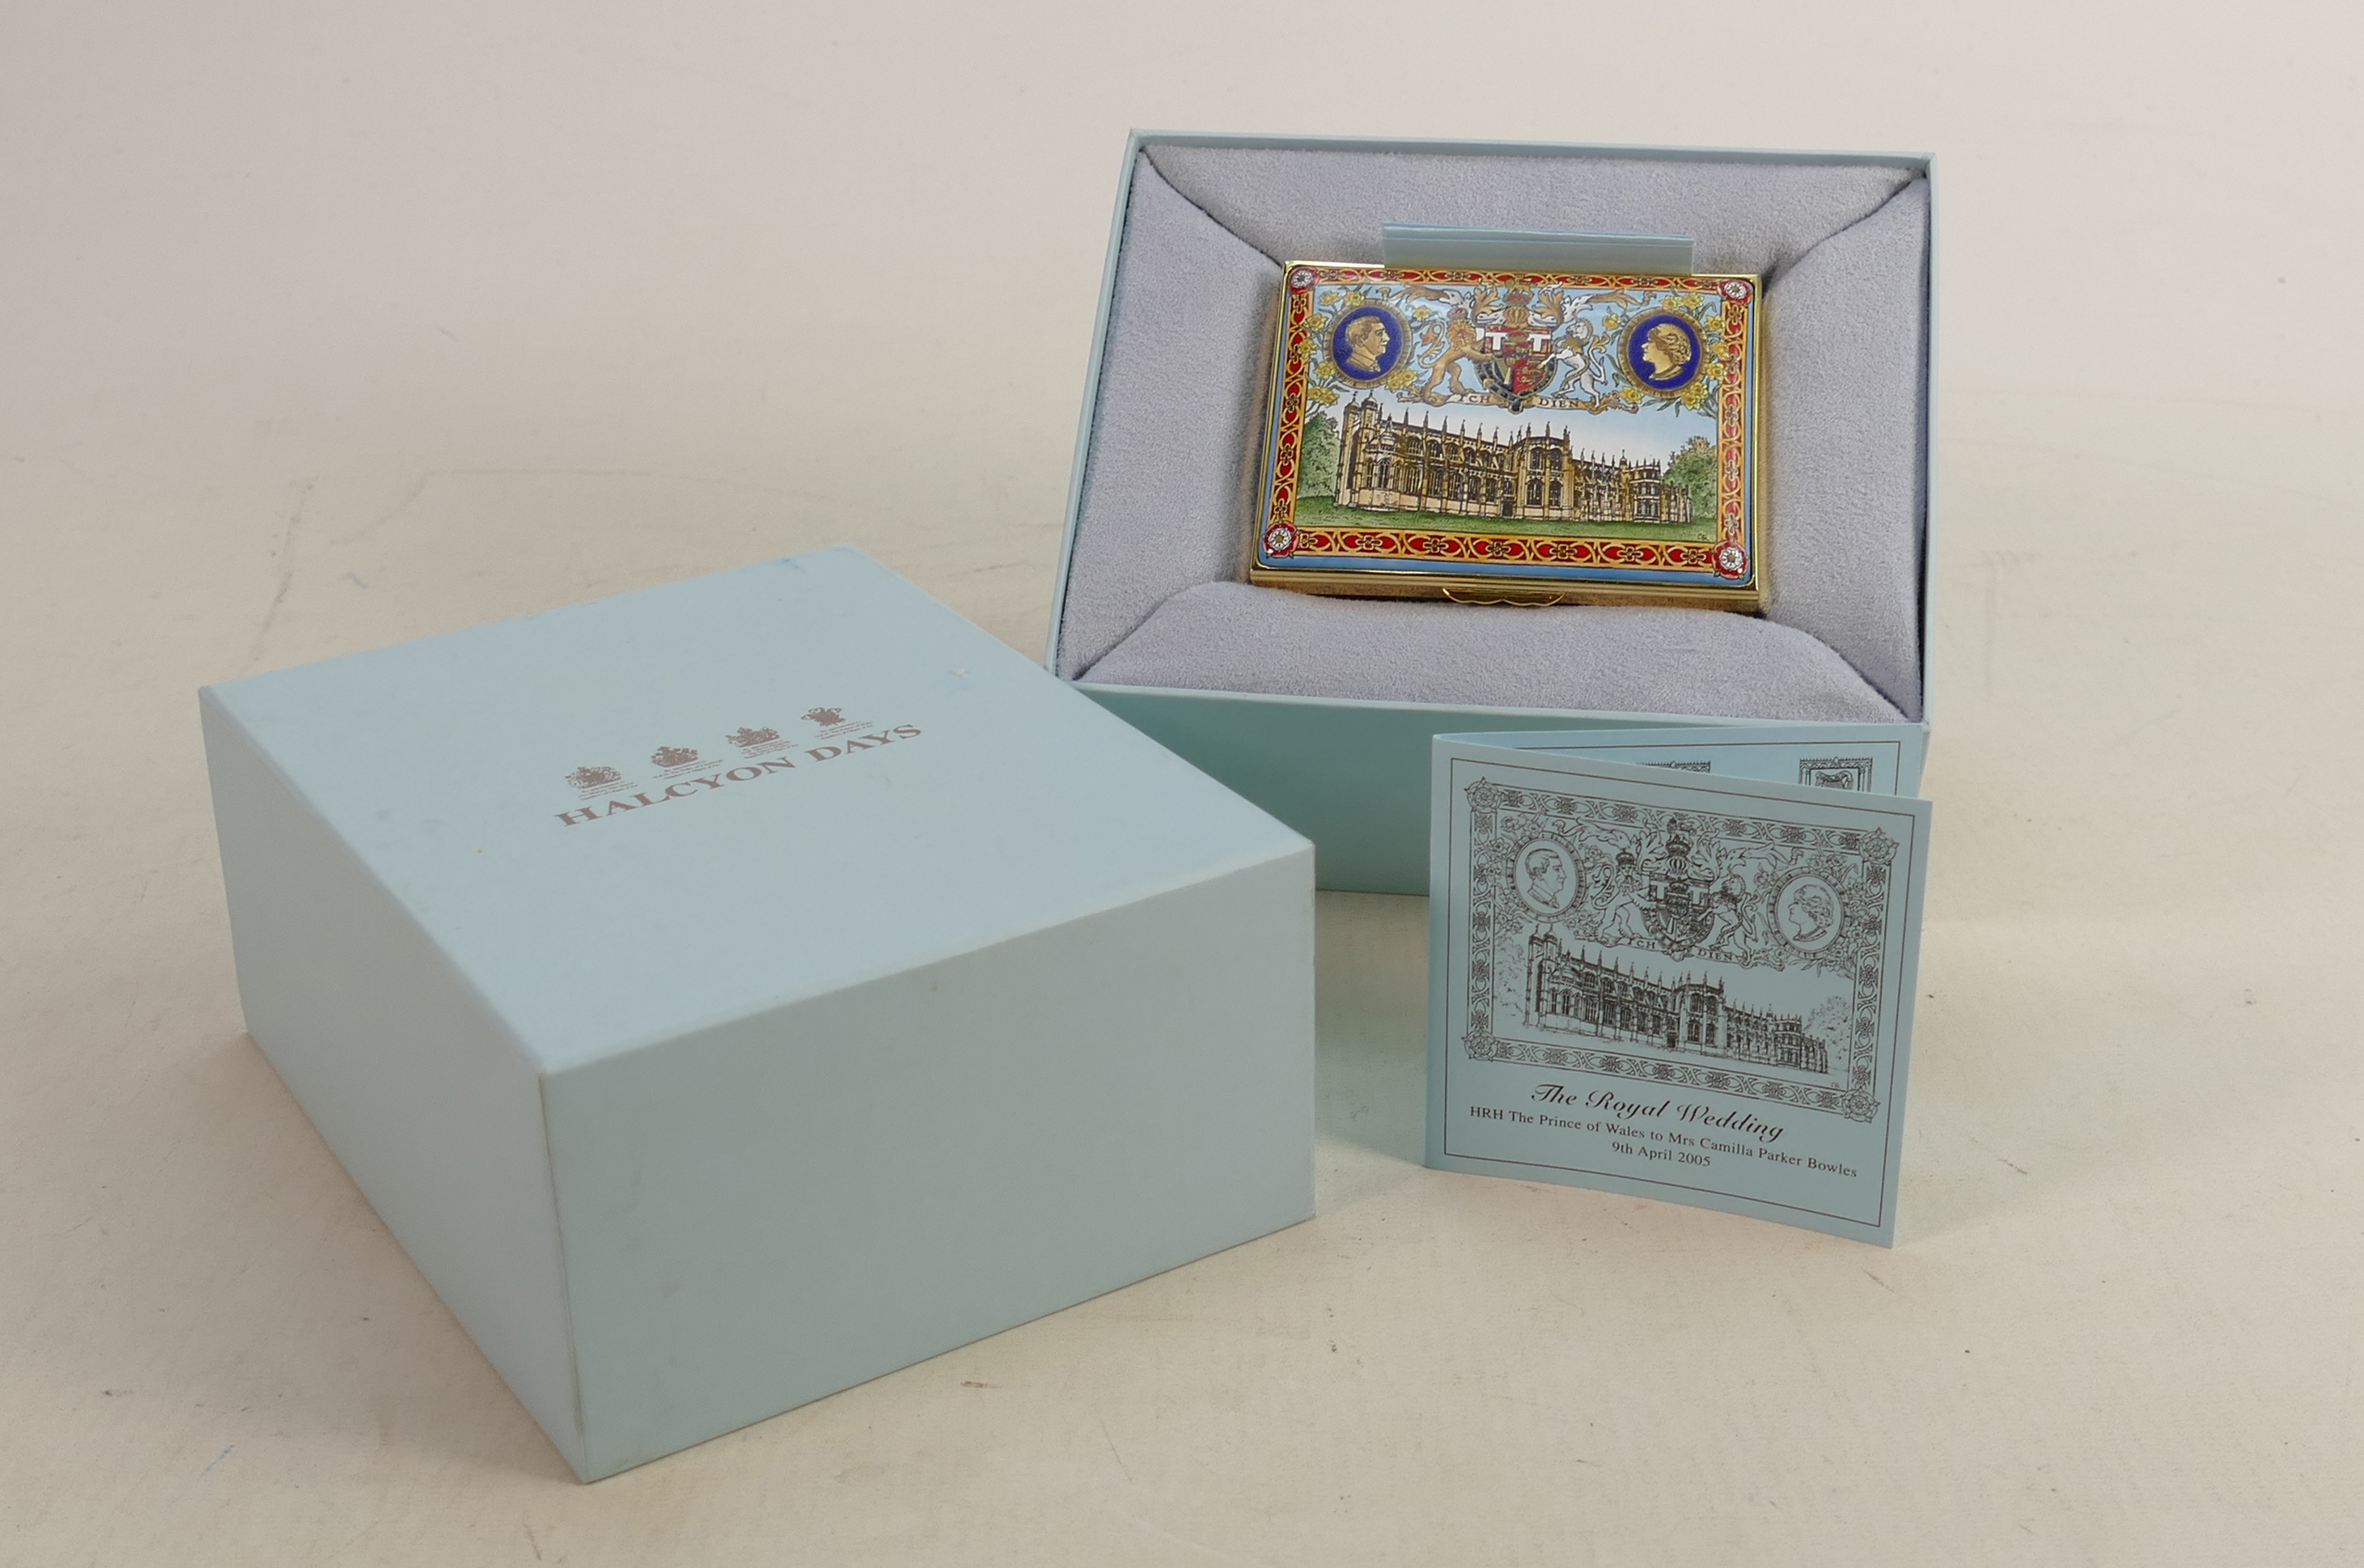 Halcyon Days hand painted enamel box WESTMINSTER ABBEY: Limited edition 39/100 with original display